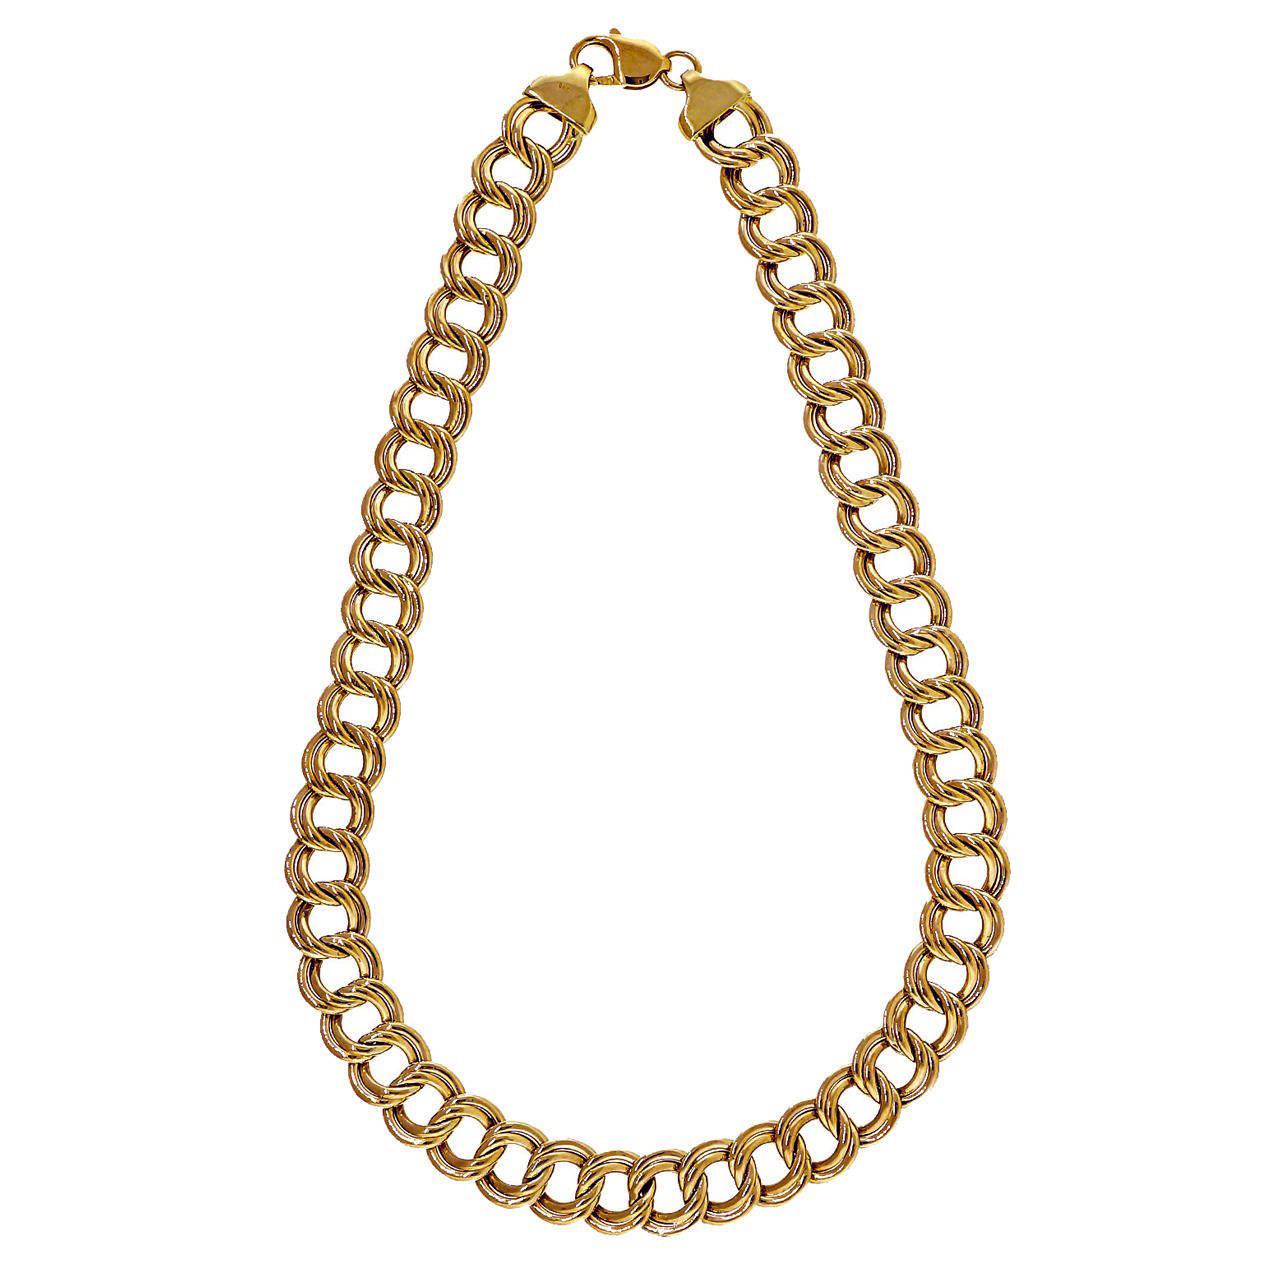 Double Swirl Yellow Gold Chain Link Necklace